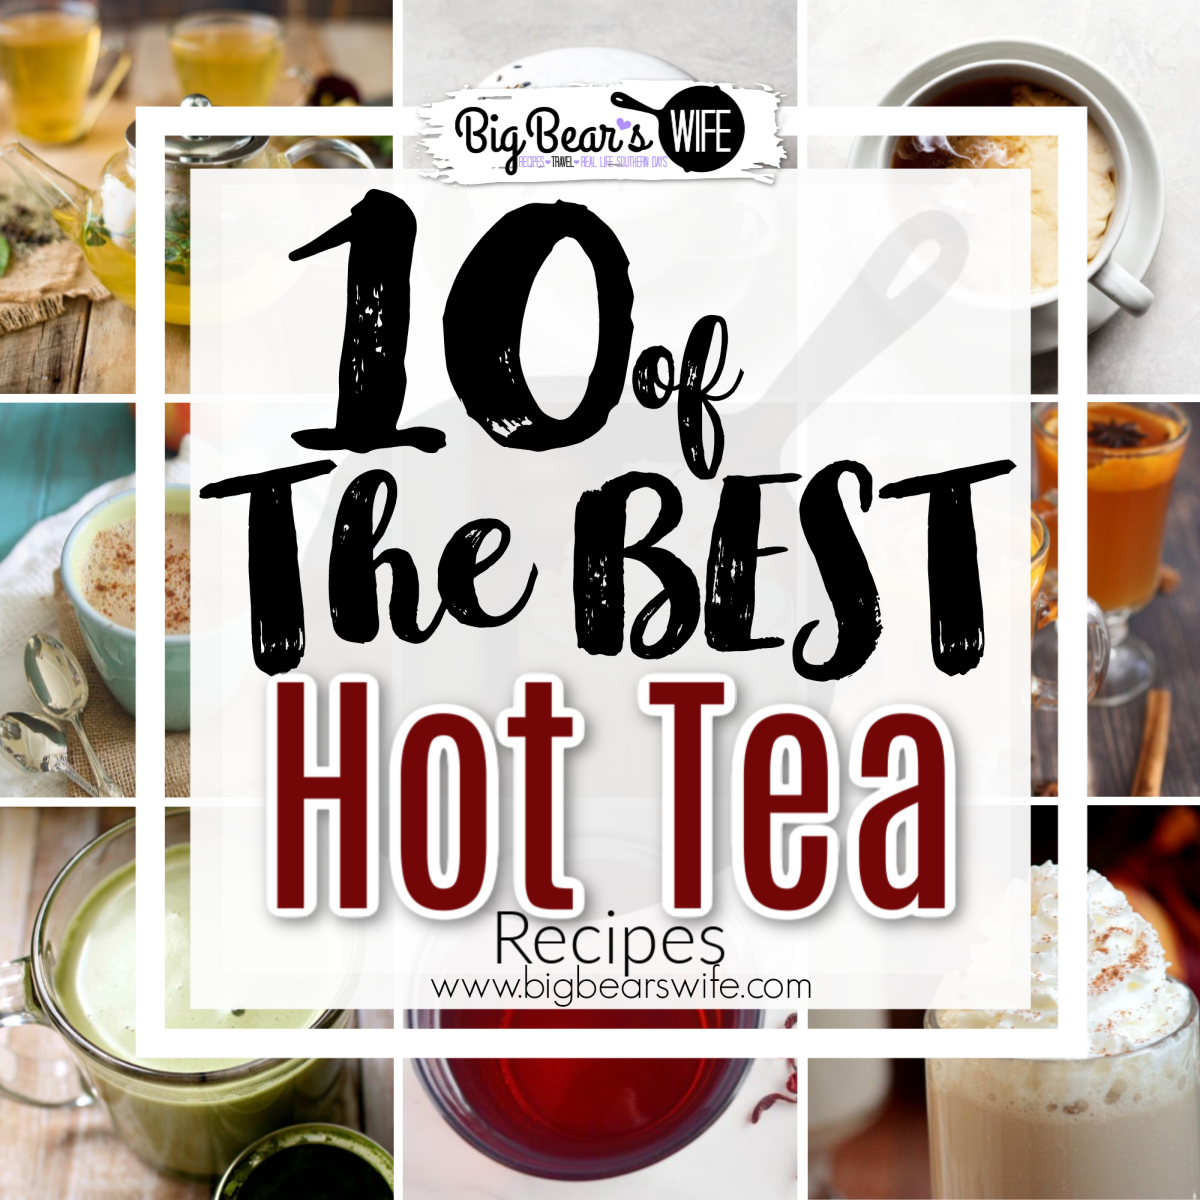 Love hot teas and looking for some new tea recipes for this new year? Here are 10 of the Best Hot Tea Recipes from bloggers we love! via @bigbearswife